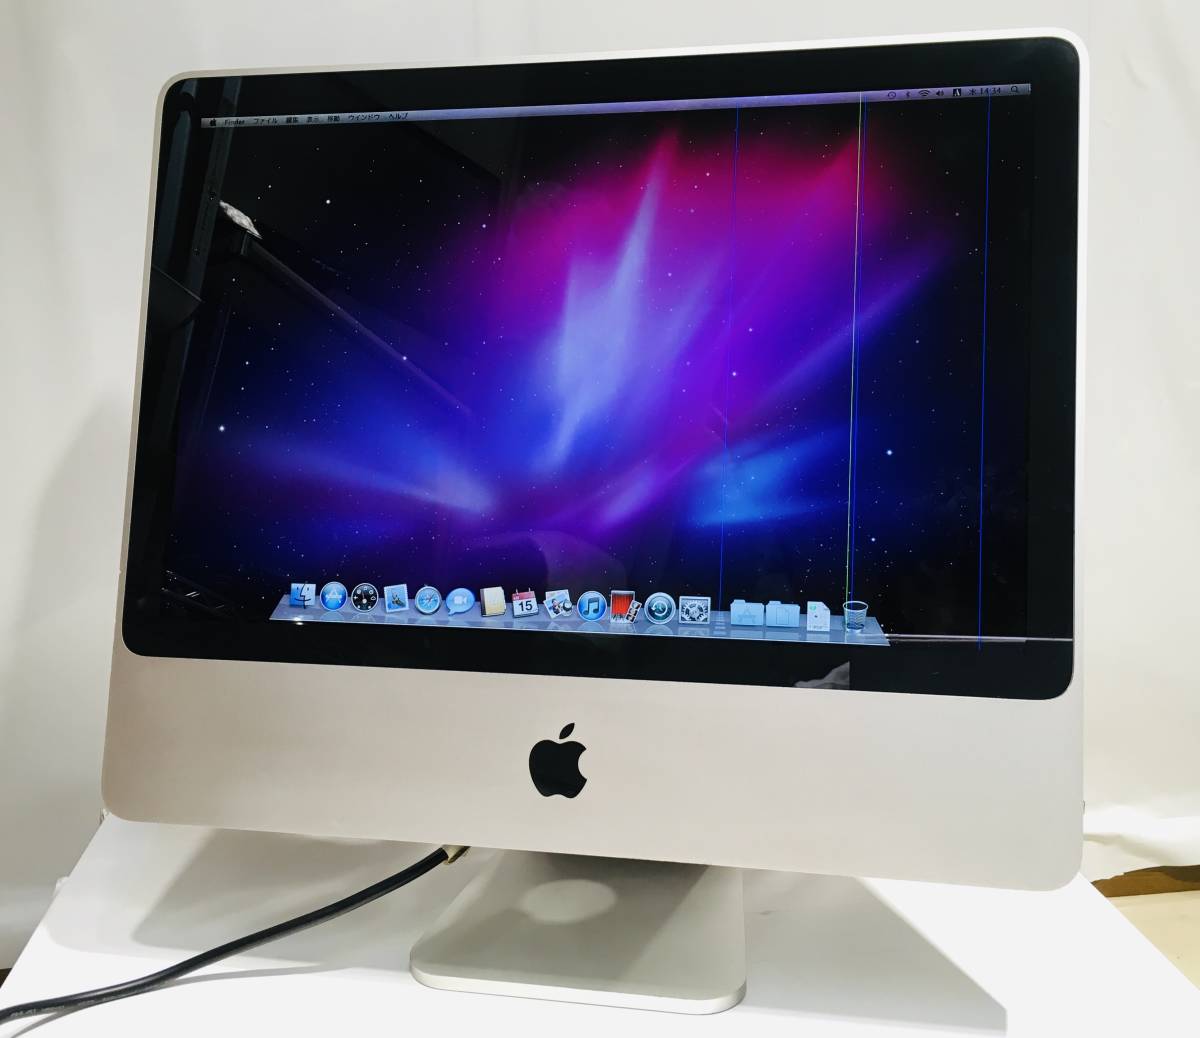 Imac iMac 20" All-in-one  Core2Duo 2.66GHz 4GB 320GB A1224 